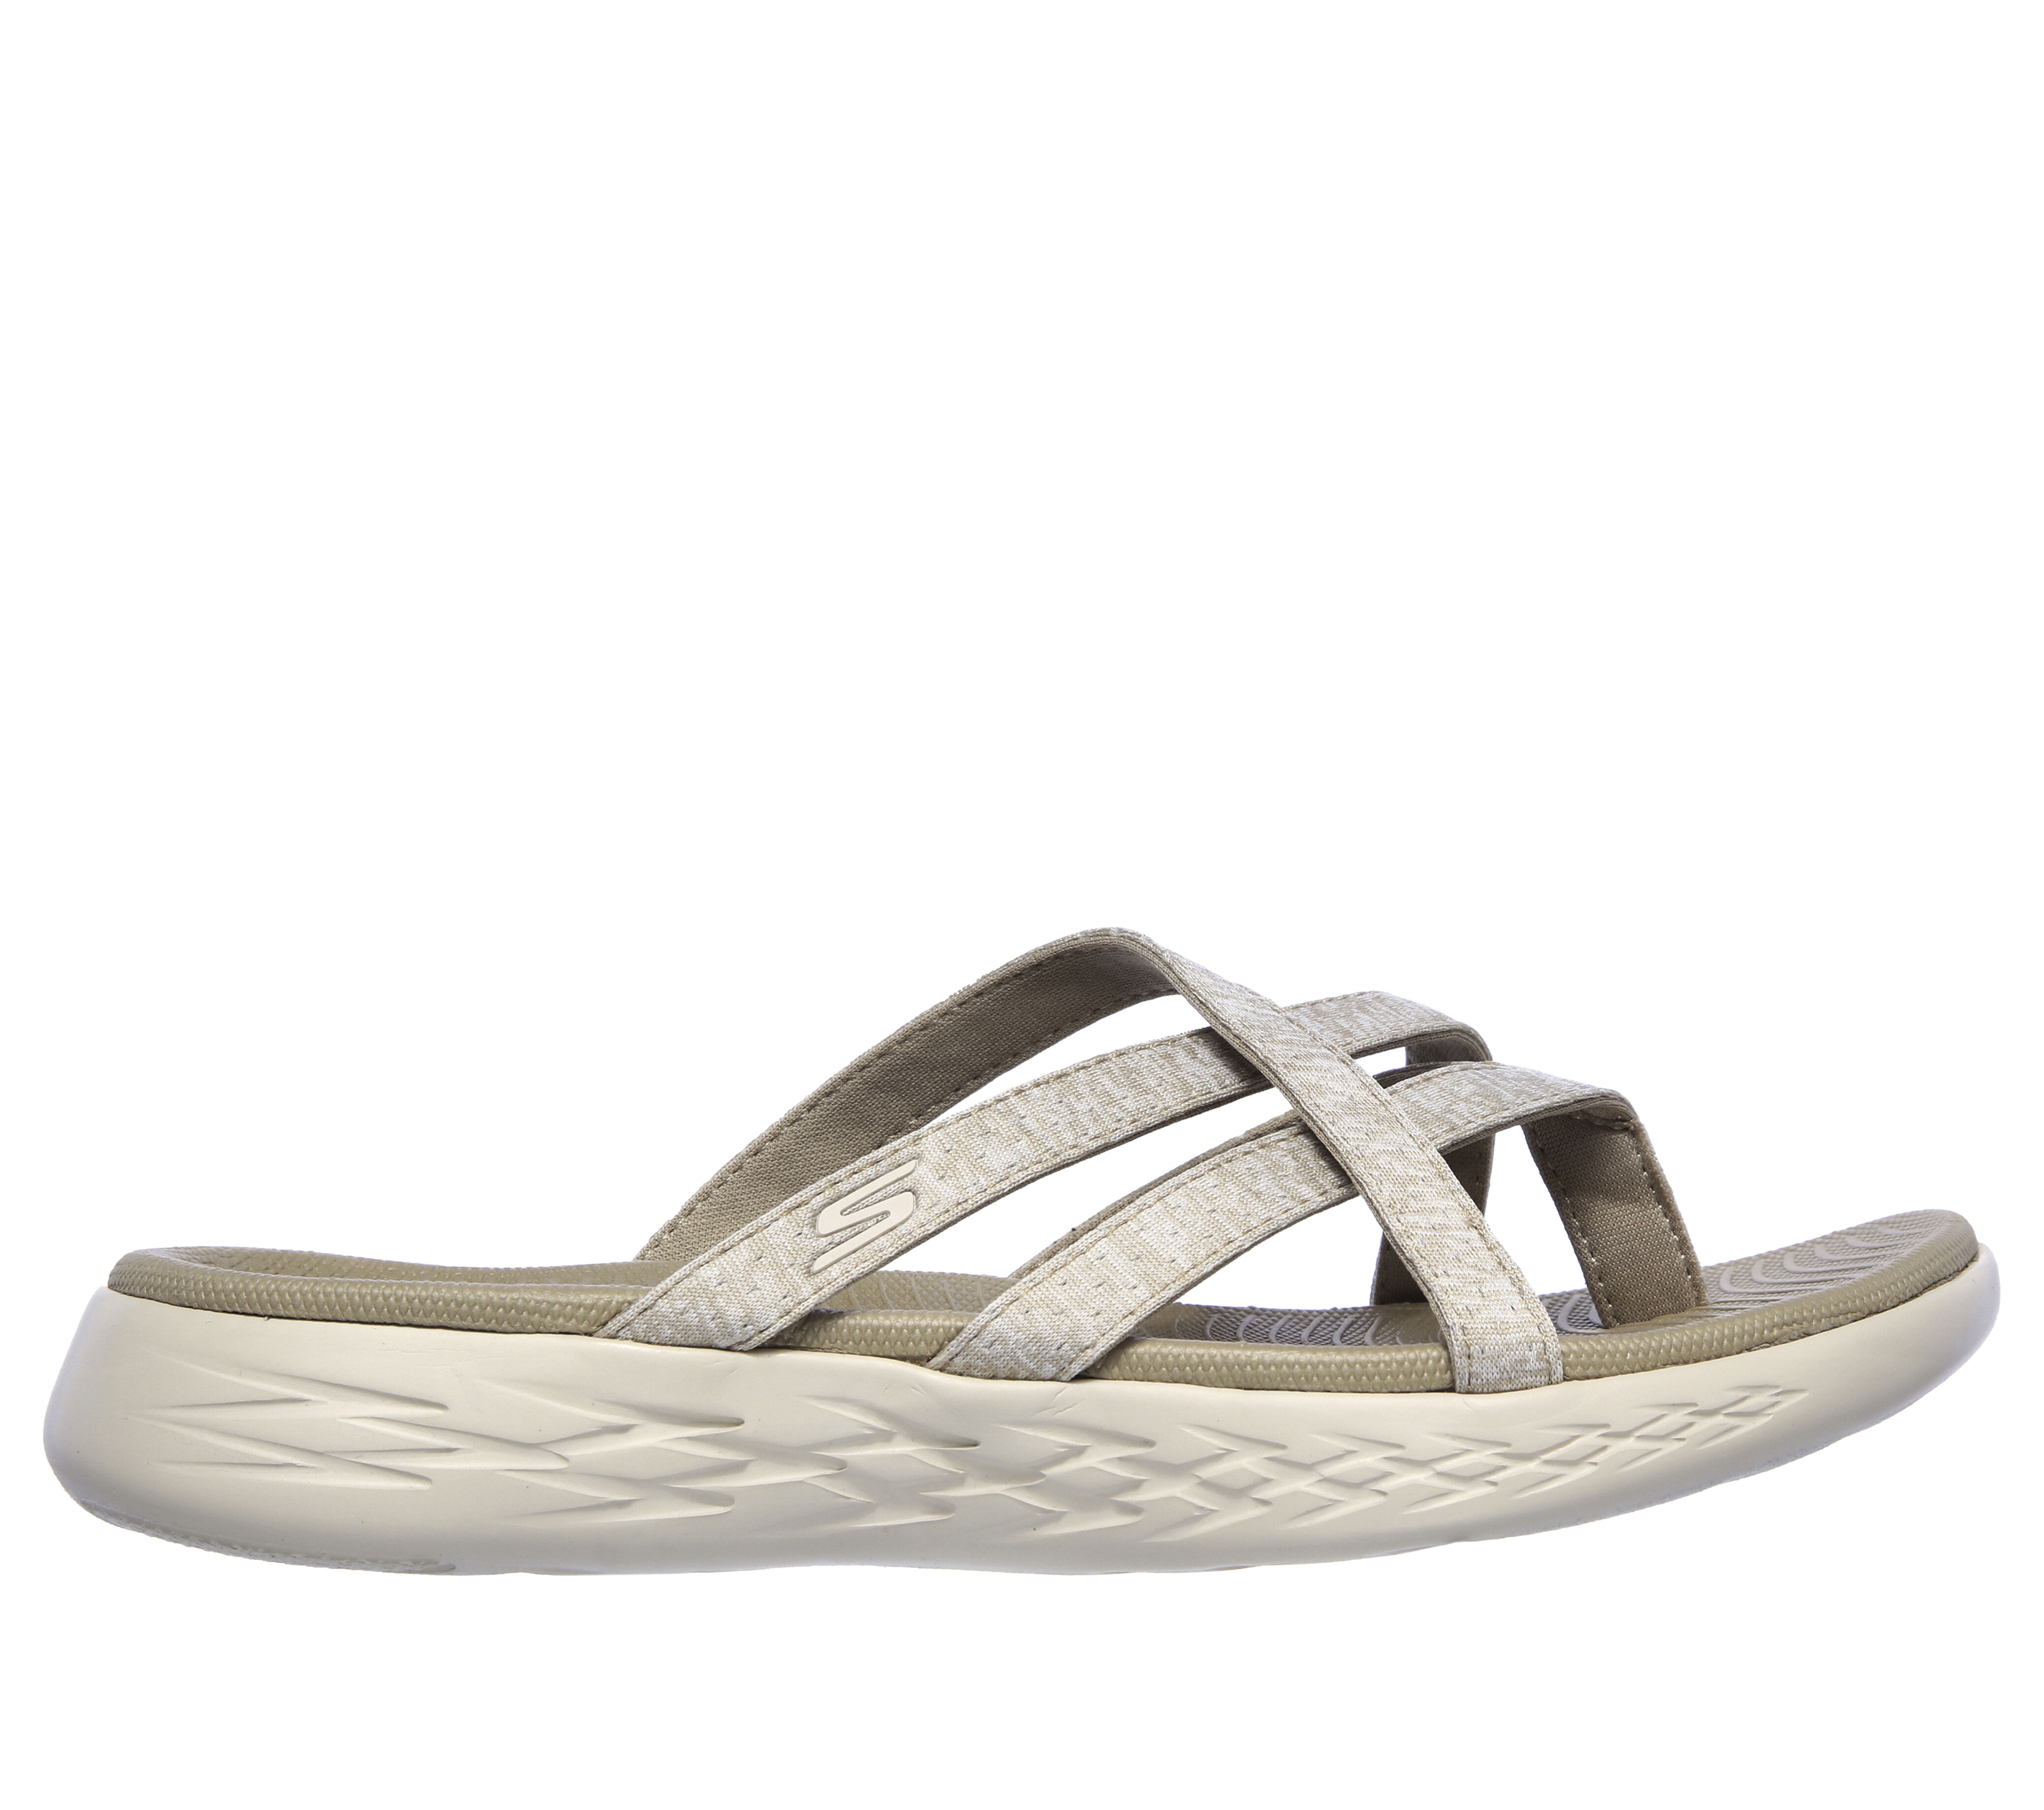 skechers on the go sandals 600